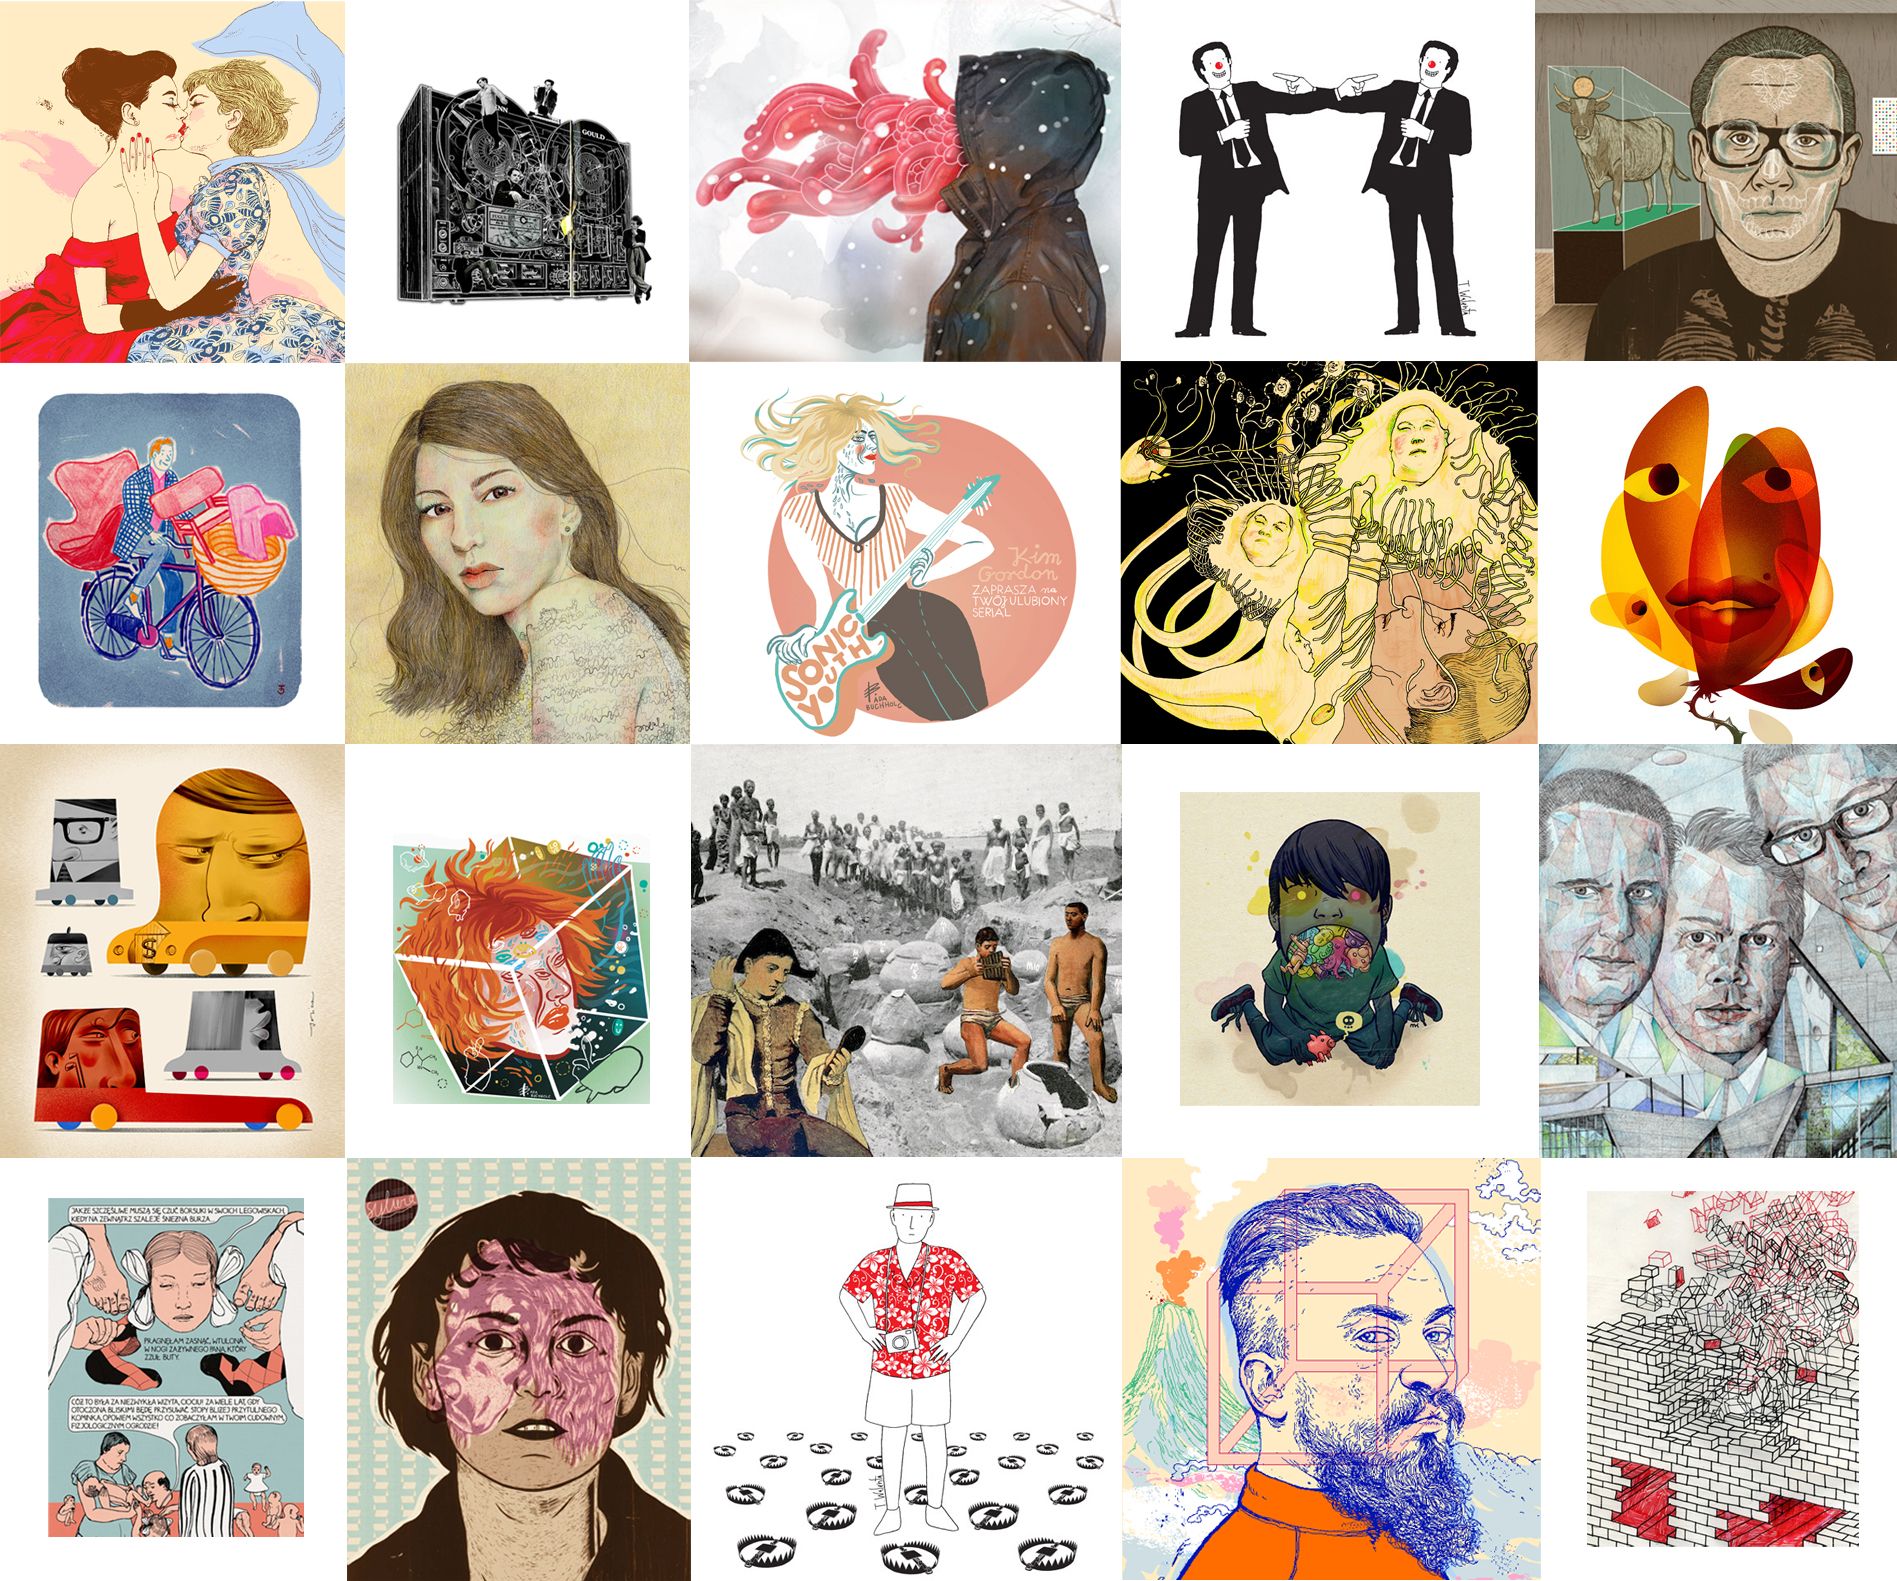 A collections of the works by artists of ILLO, photo courtesy of the Pigasus-Gallery, Berlin 